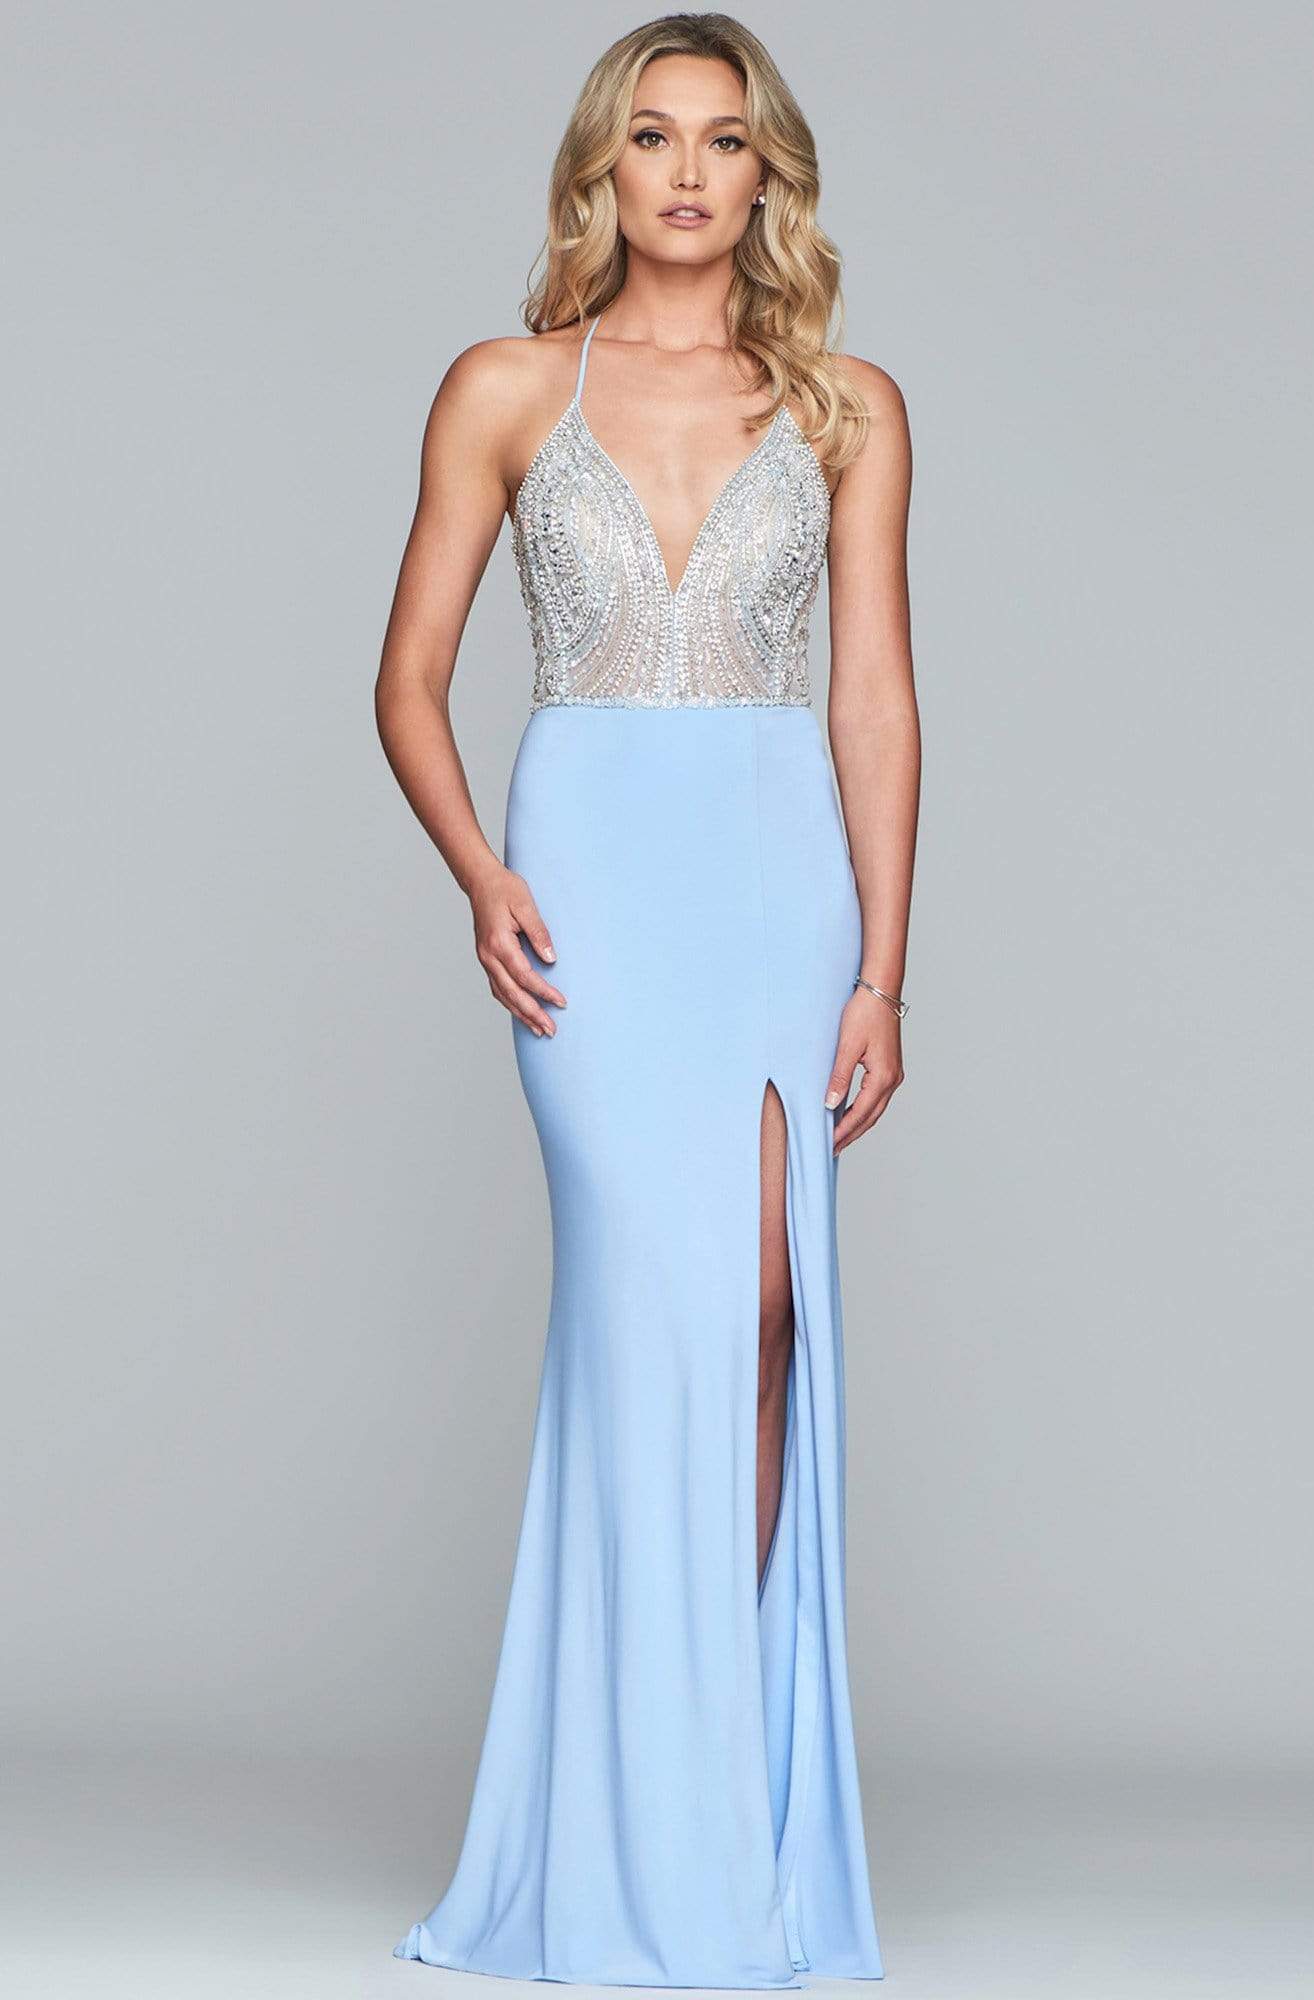 Faviana - s10060 Plunging V-Neckline Jersey Gown Prom Dresses 0 / Cloud Blue